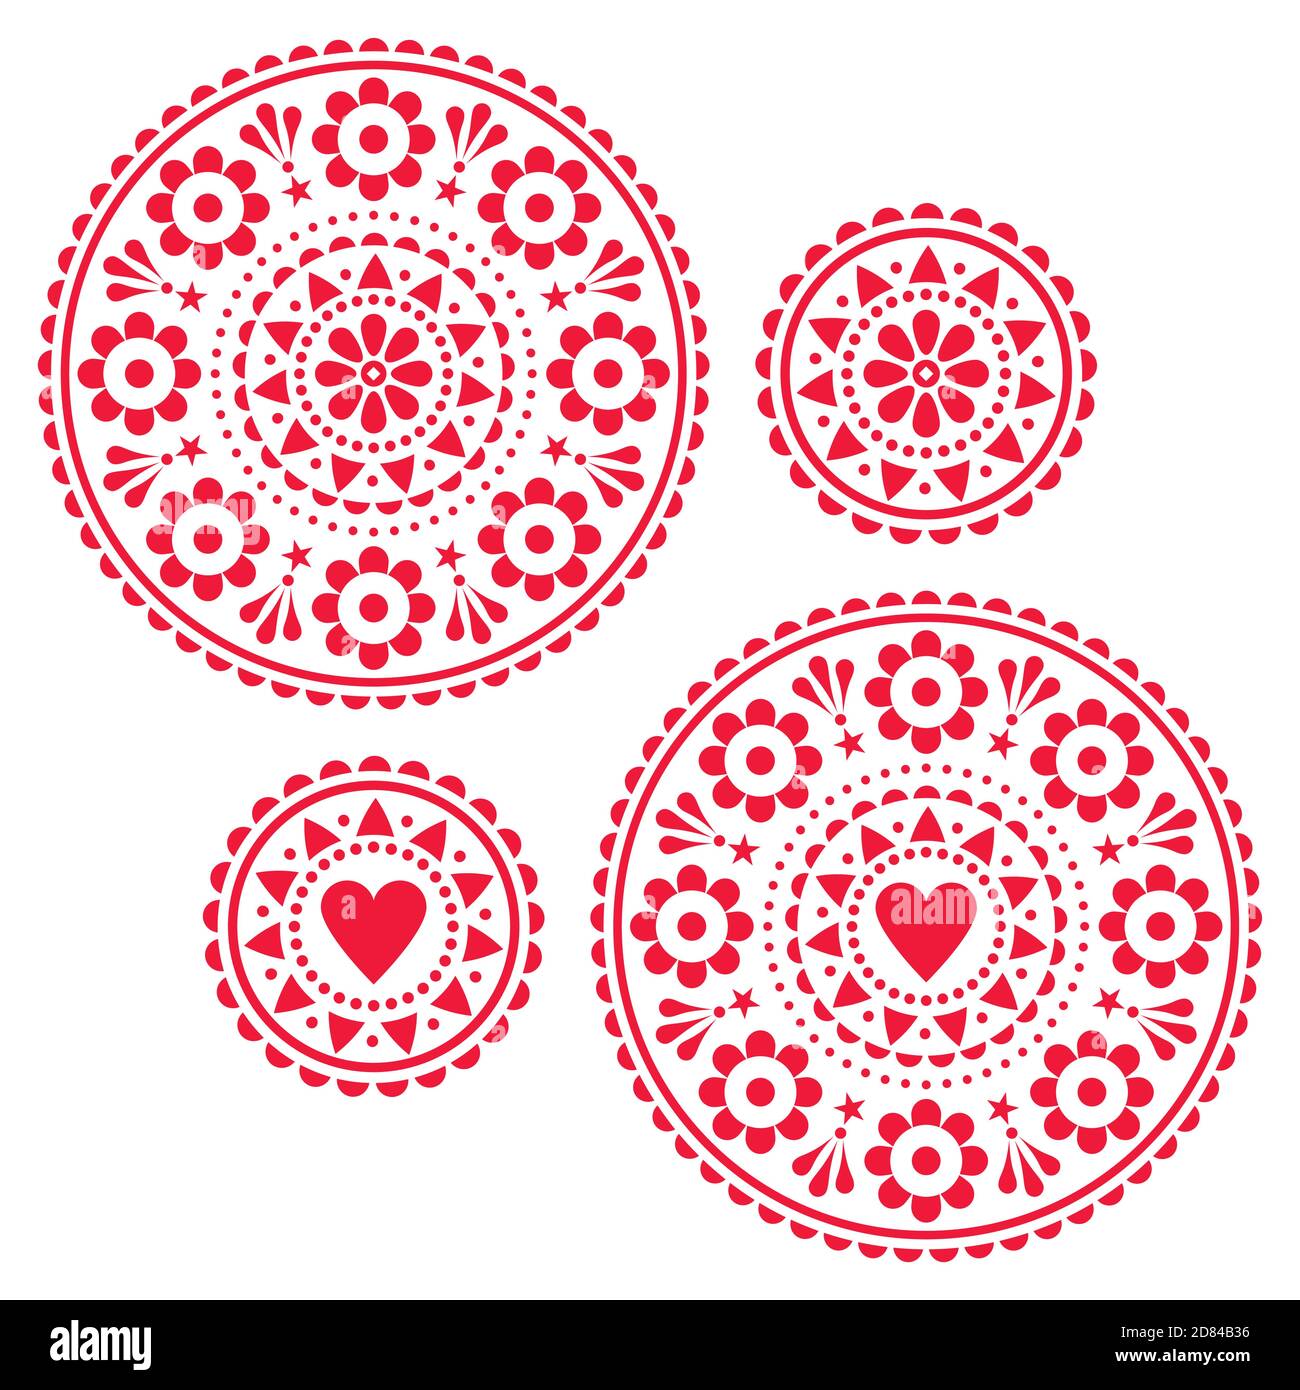 Scandinavian folk style vector mandala design set - cute greeting card on invitation round patterns with hearts and flowers Stock Vector